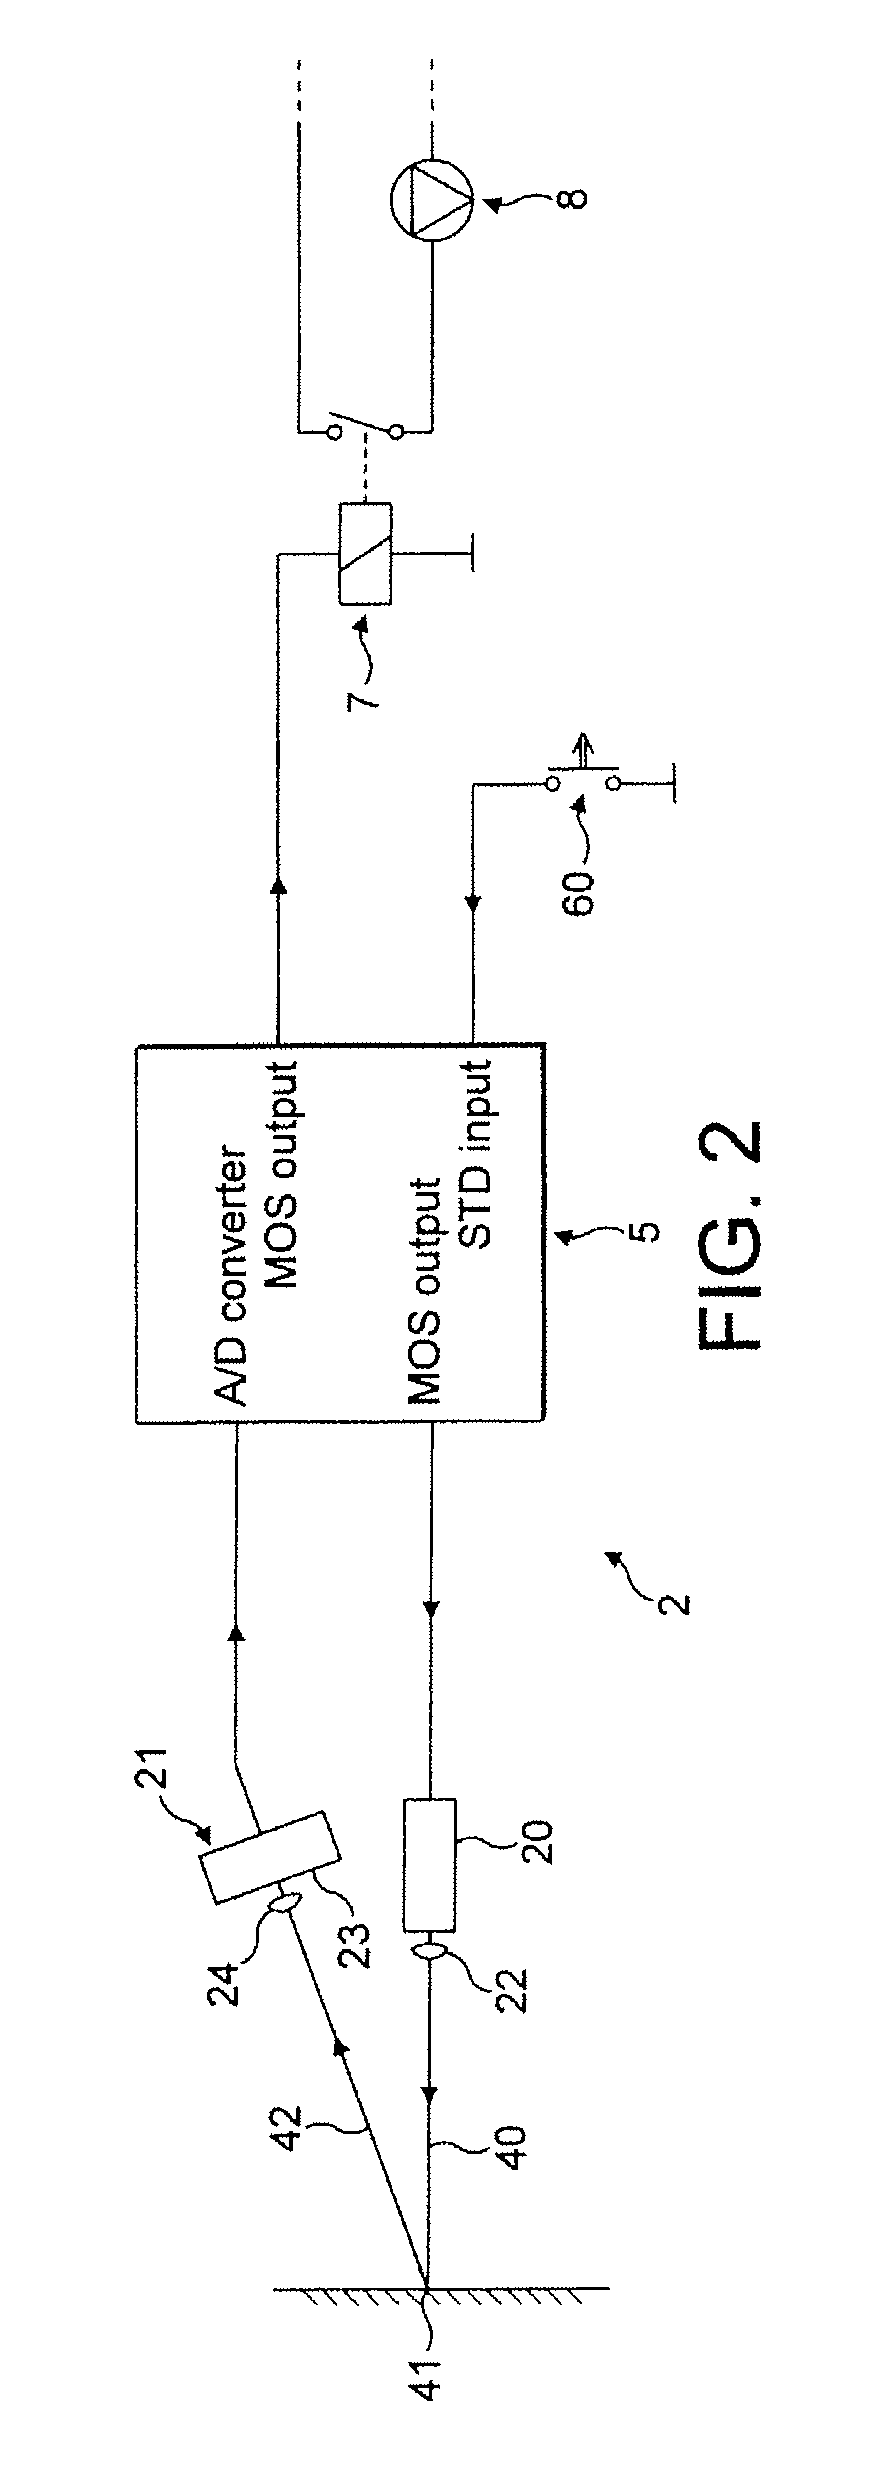 Device and method for controlling the filling of a cup by a vending machine